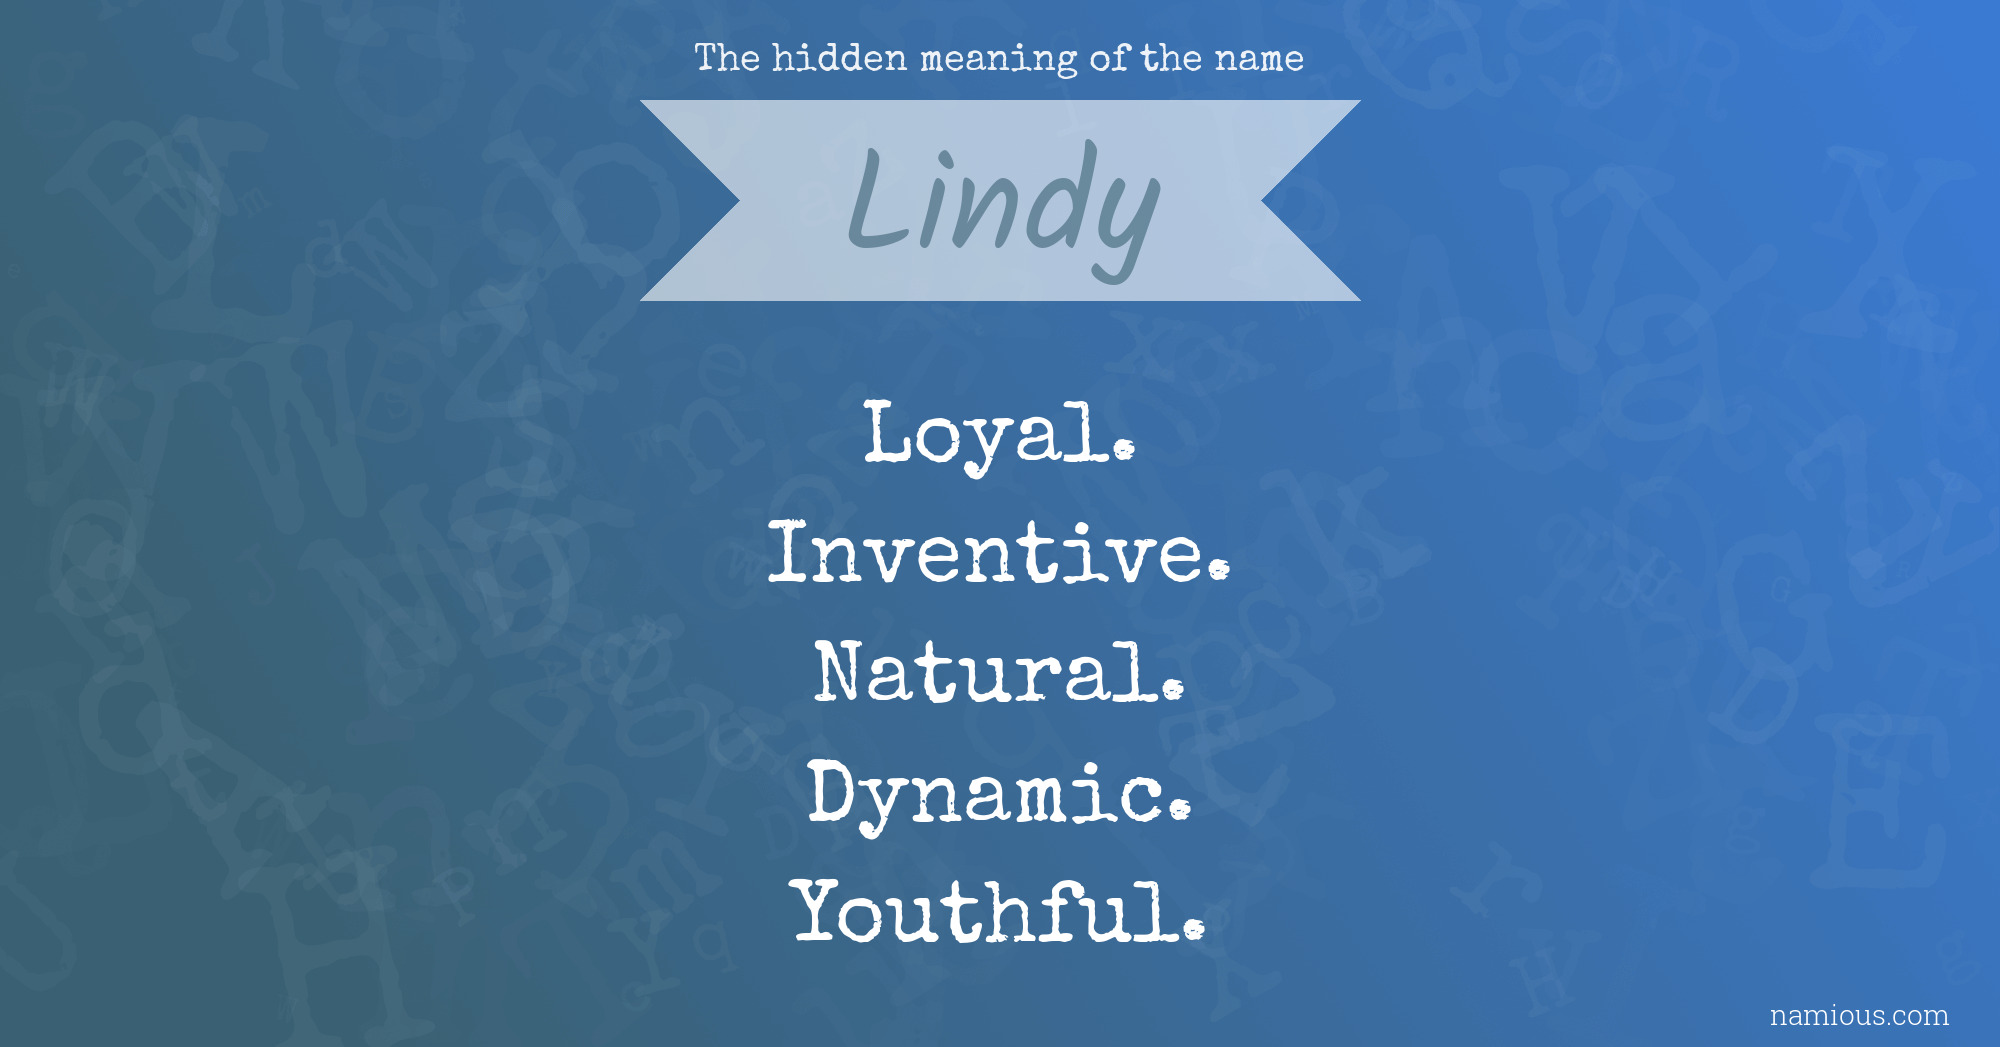 The hidden meaning of the name Lindy